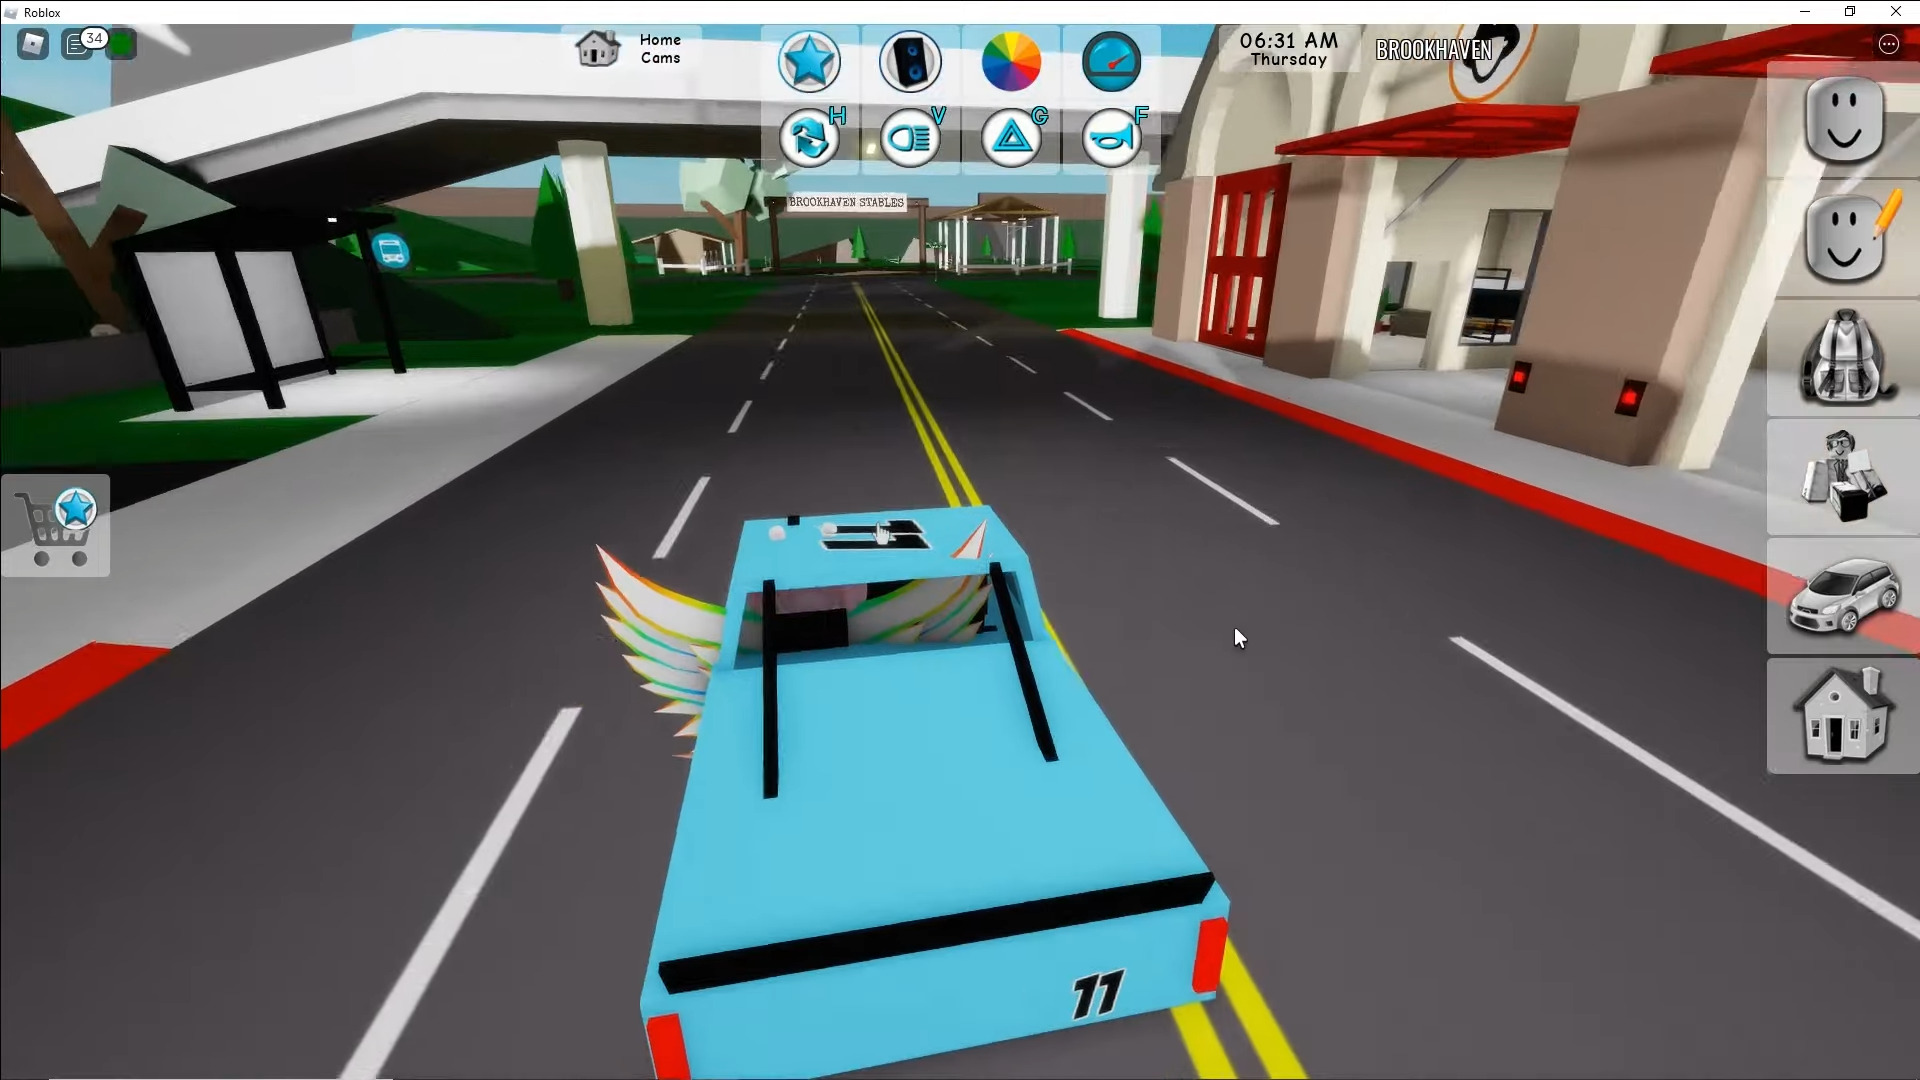 Roblox Brookhaven Cheats and Tips